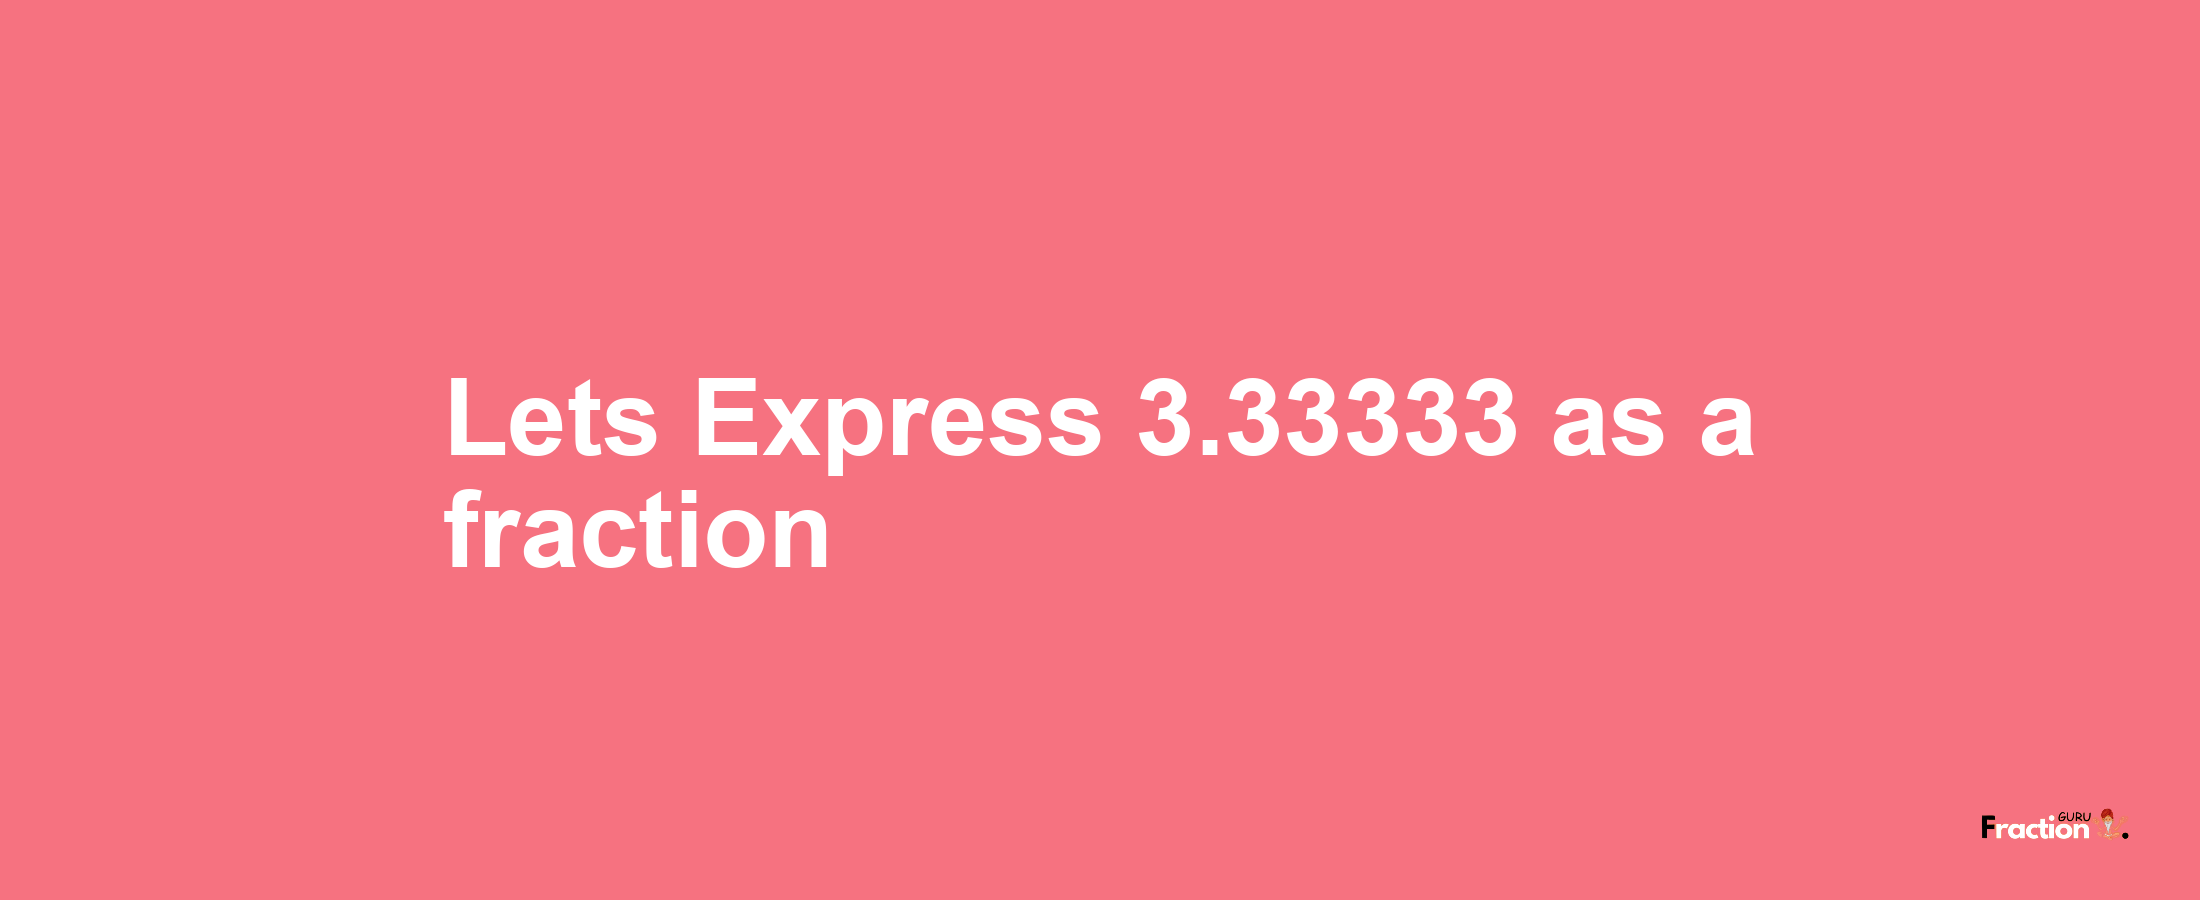 Lets Express 3.33333 as afraction